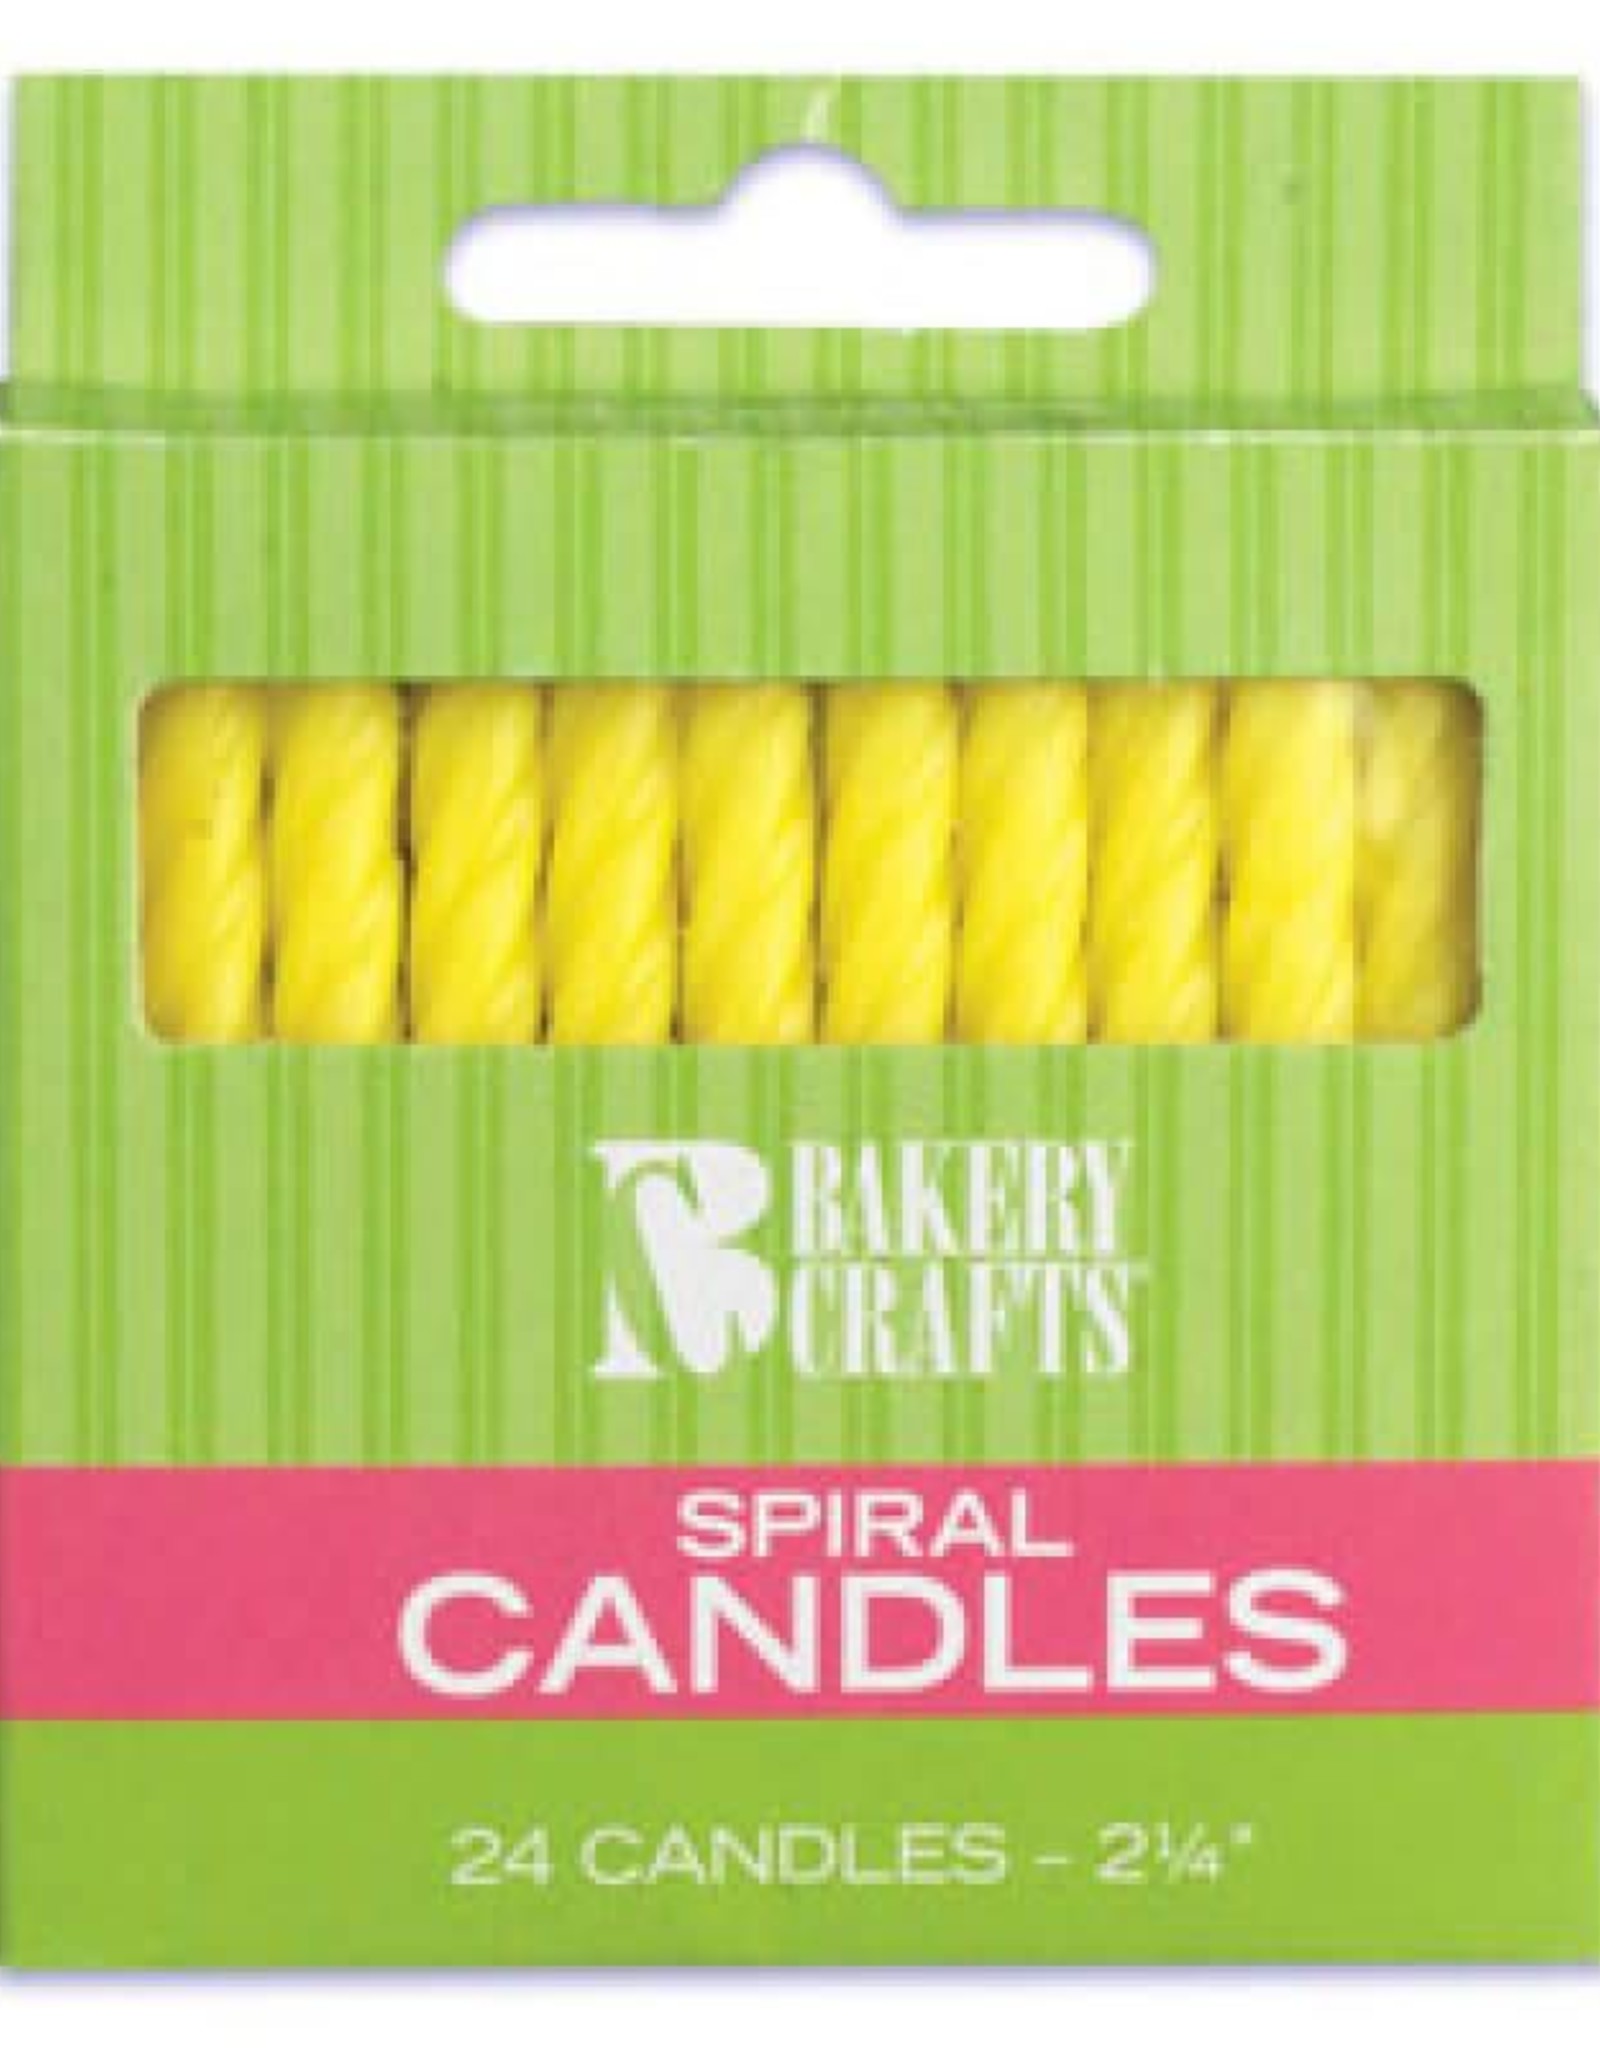 Spiral Candles (yellow)